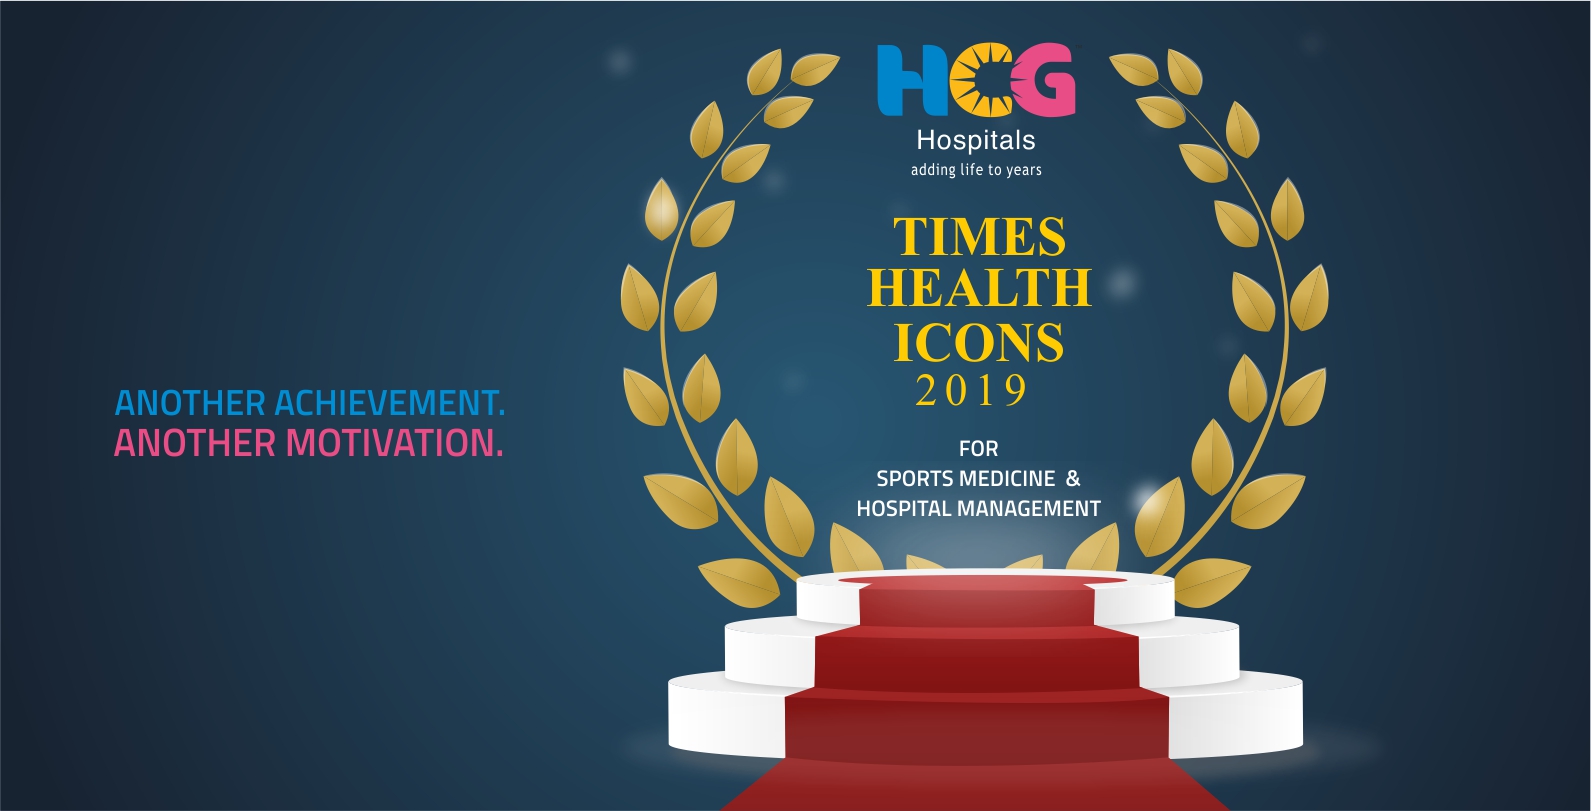 Times Health Icons – 2019